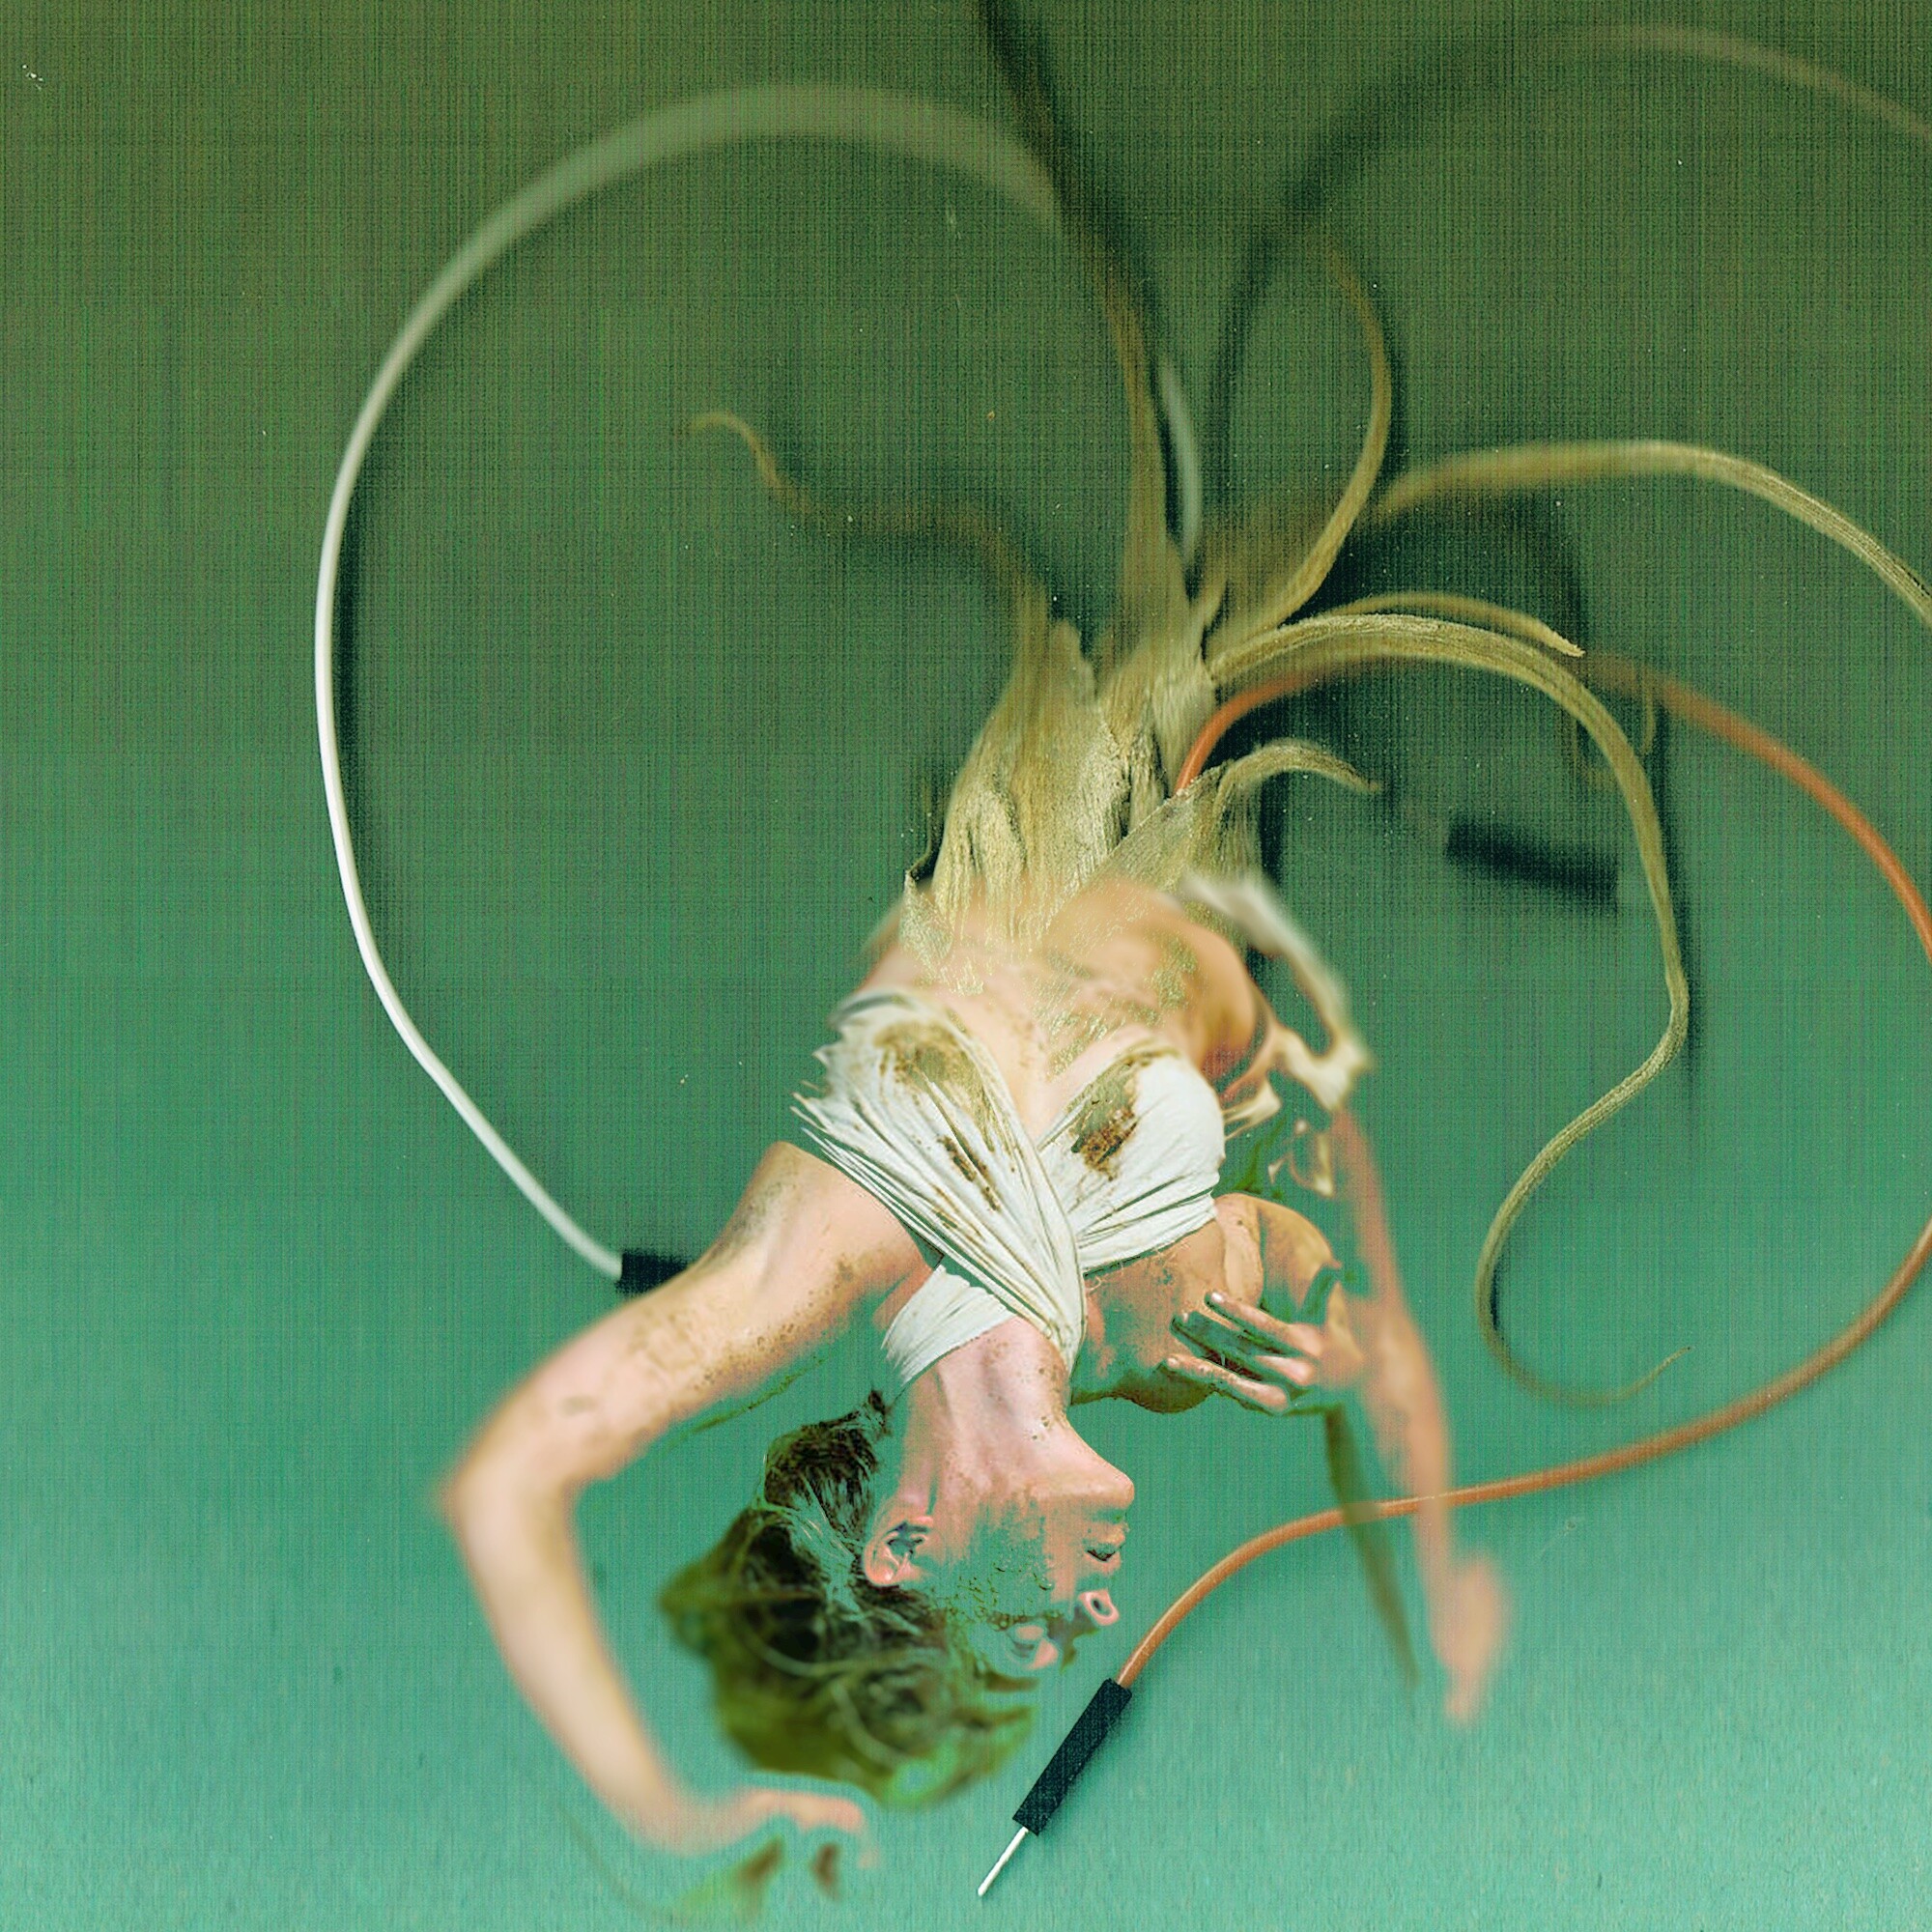 This picture shows a painting with a green background. In front of it is a creature, half human, half plant, depicted standing on its head.